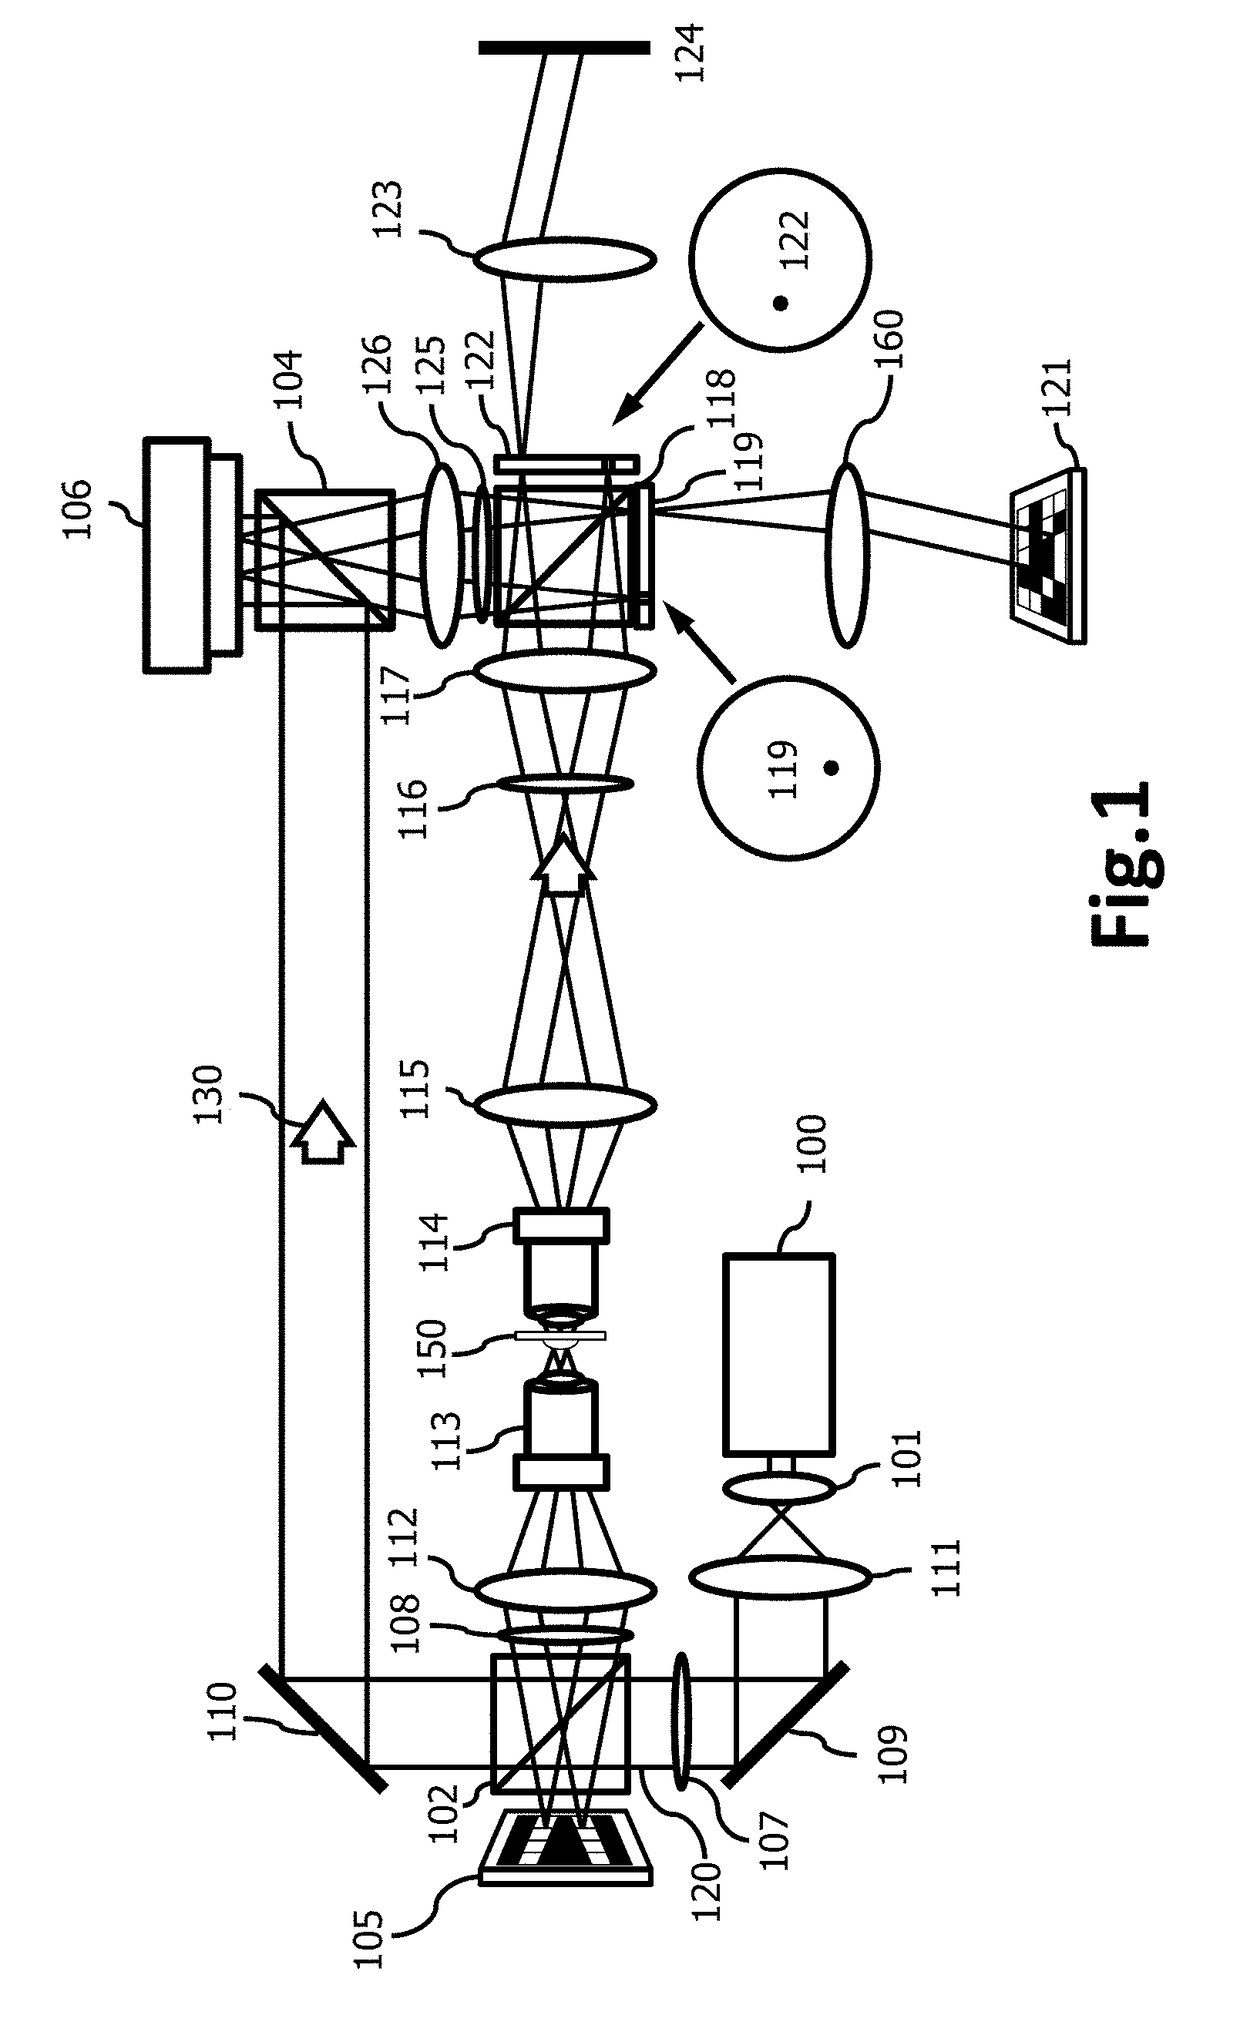 Method and Apparatus of Structured Illumination Digital Holography